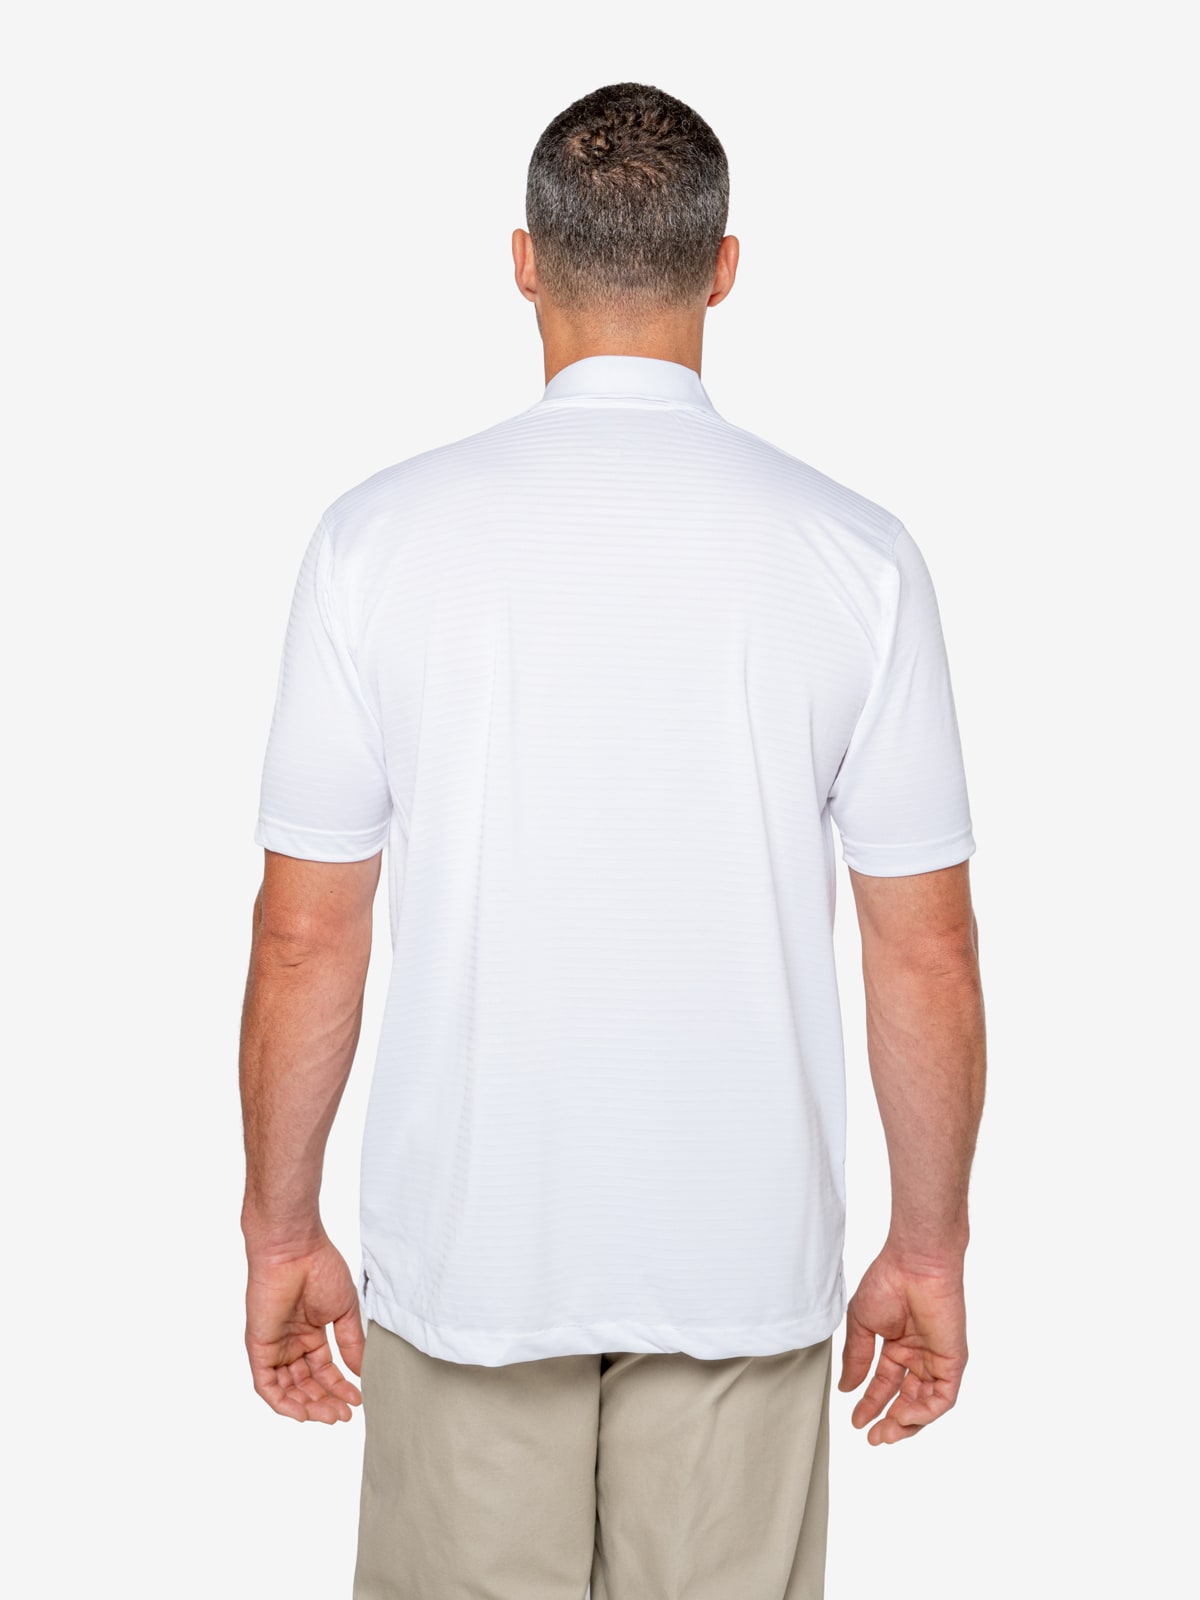 Insect Shield Men's Short Sleeve Tech Polo